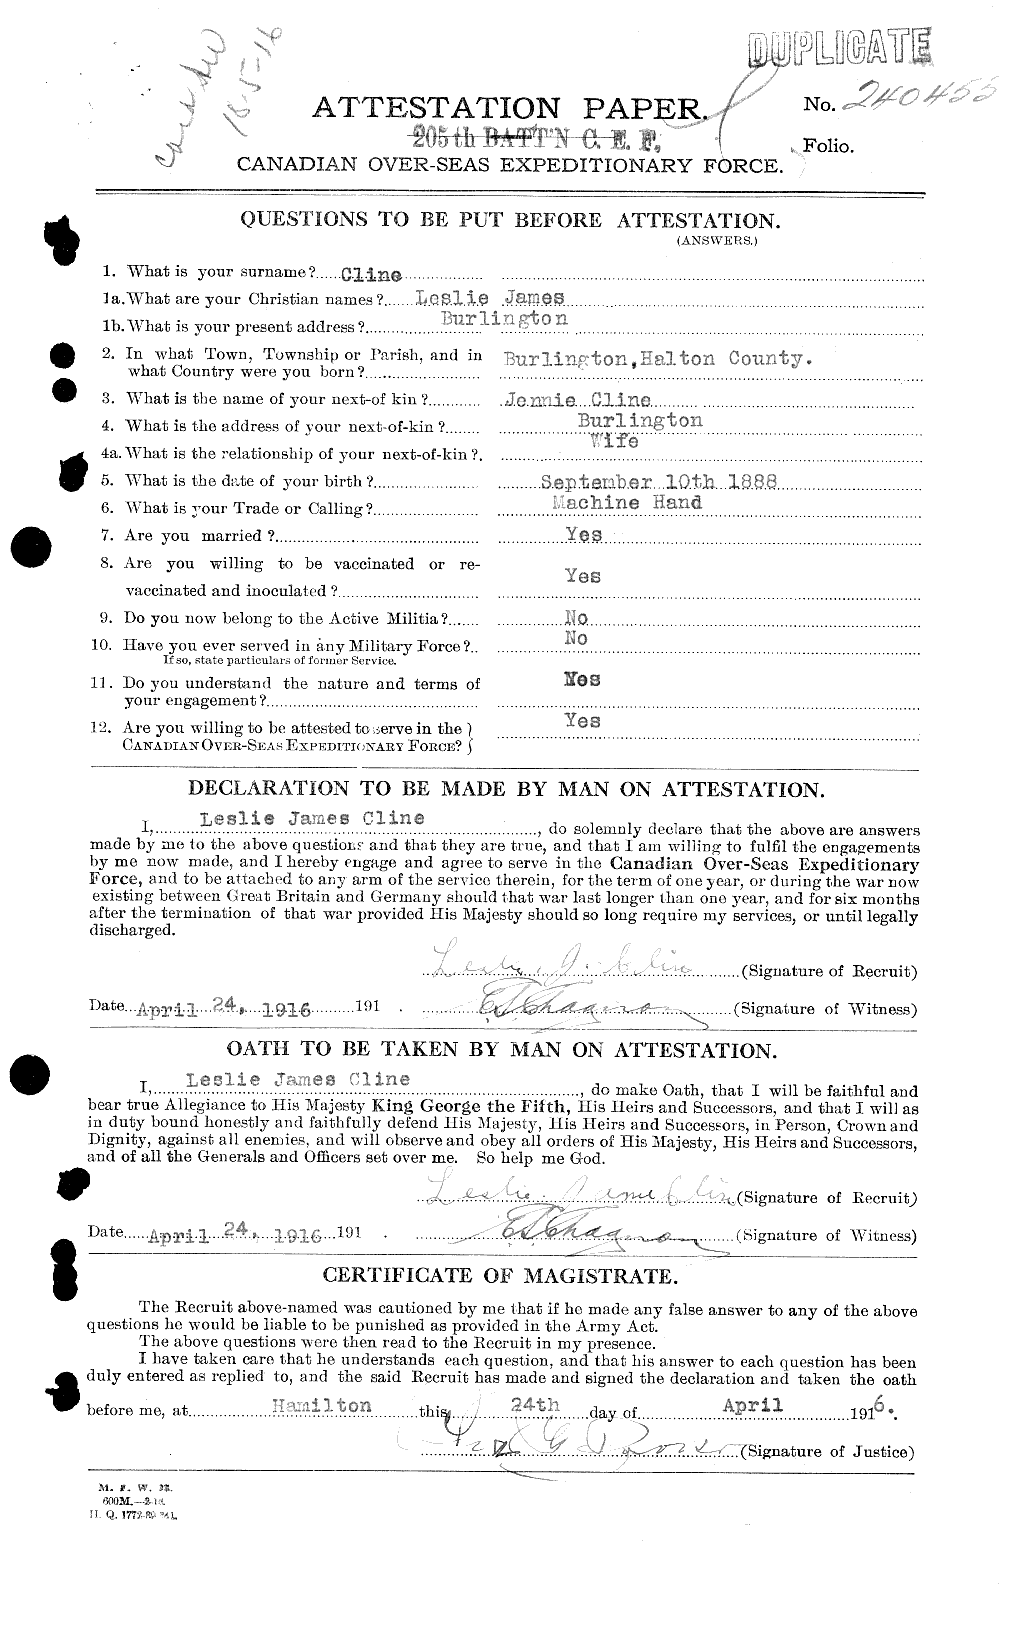 Personnel Records of the First World War - CEF 029100a